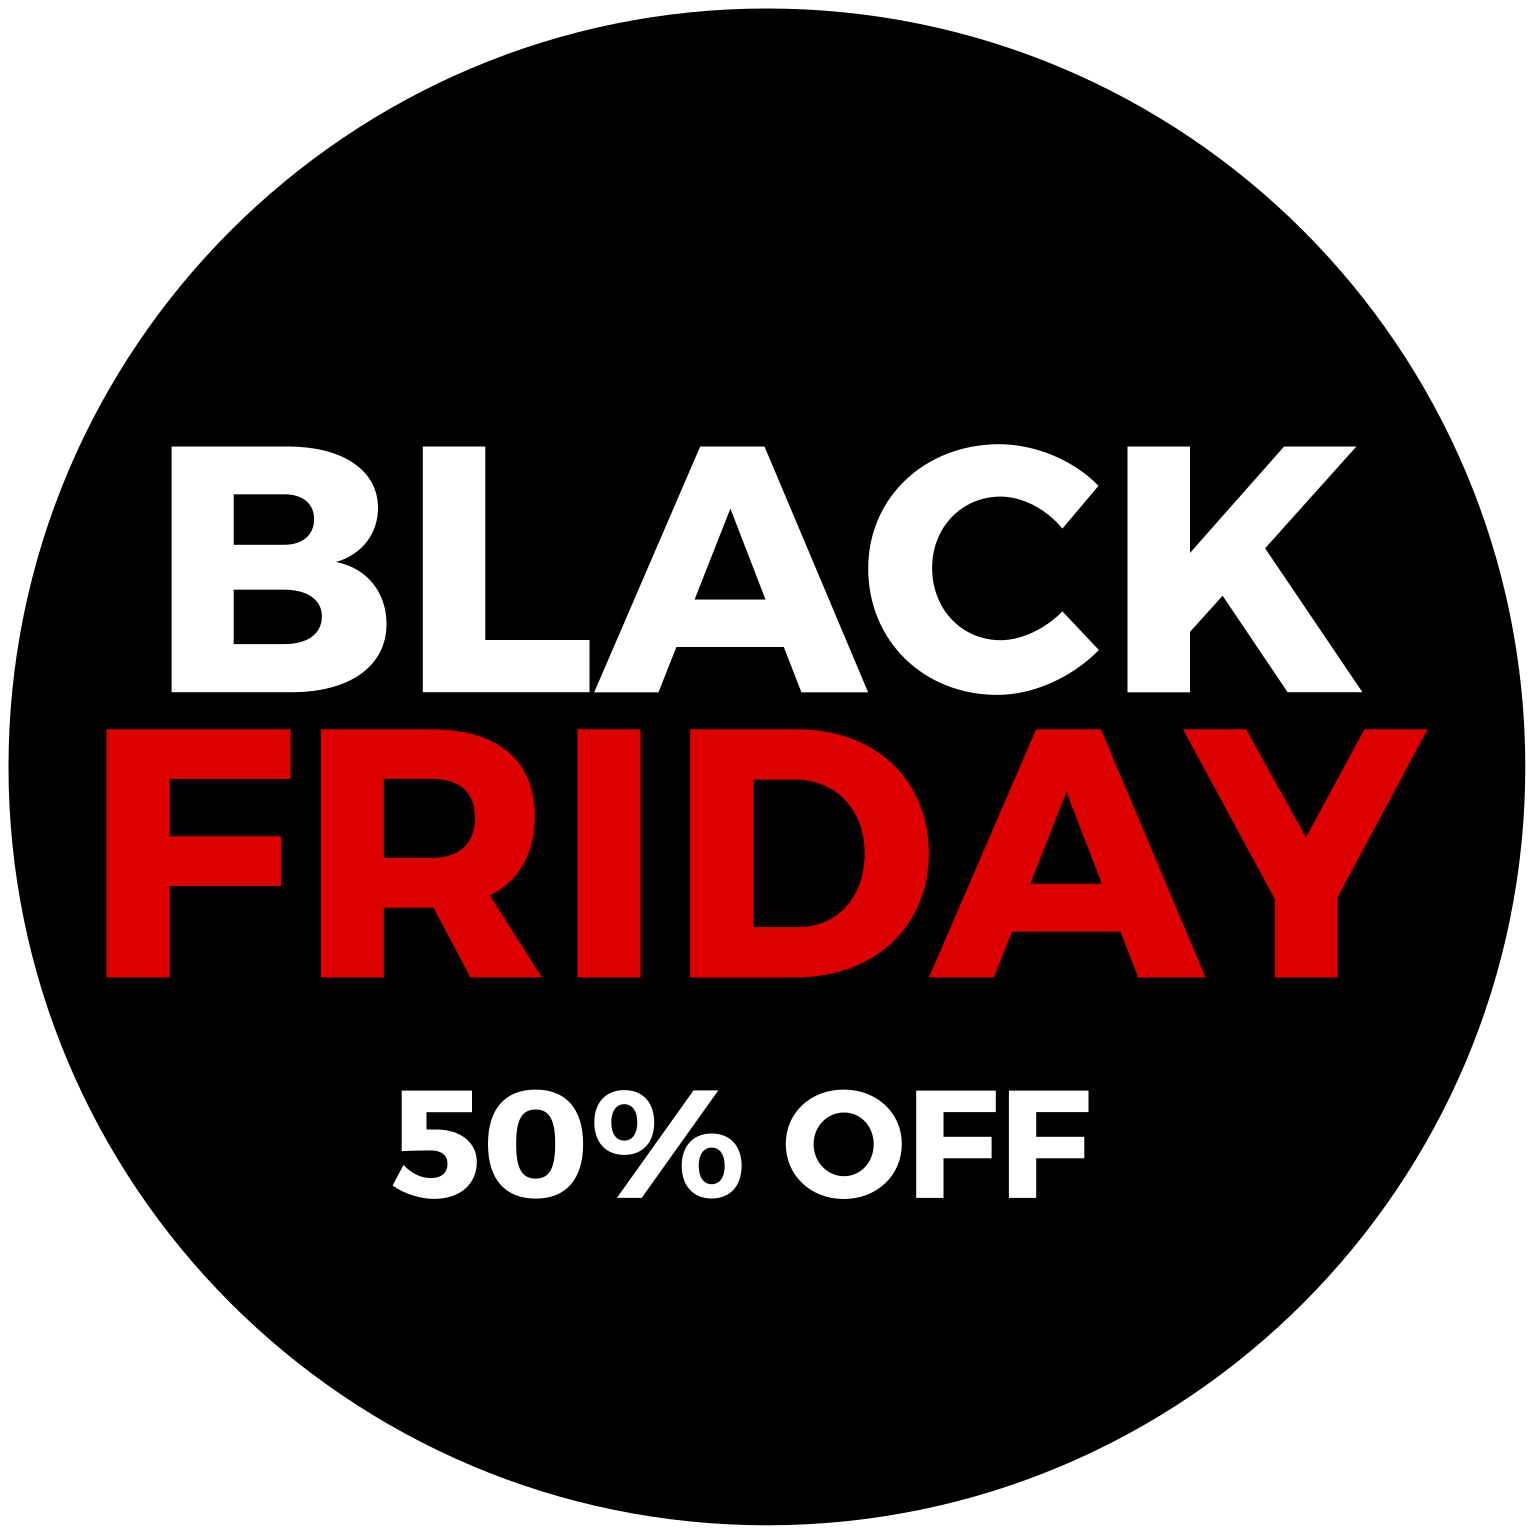 Black Friday Up to 50% off 9x16 